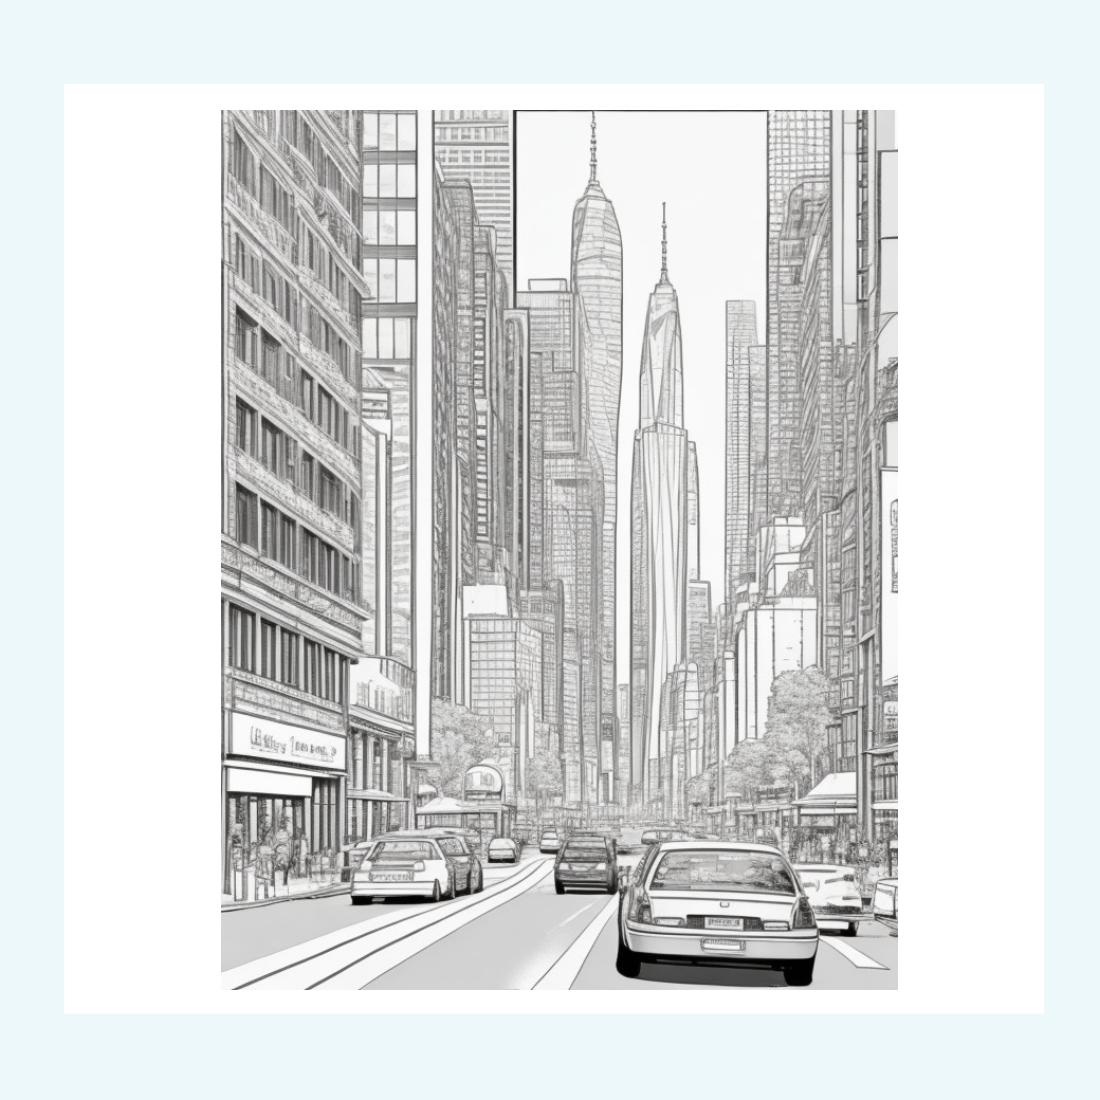 A cityscape with skyscrapers and a busy street scene coloring page 4 preview image.